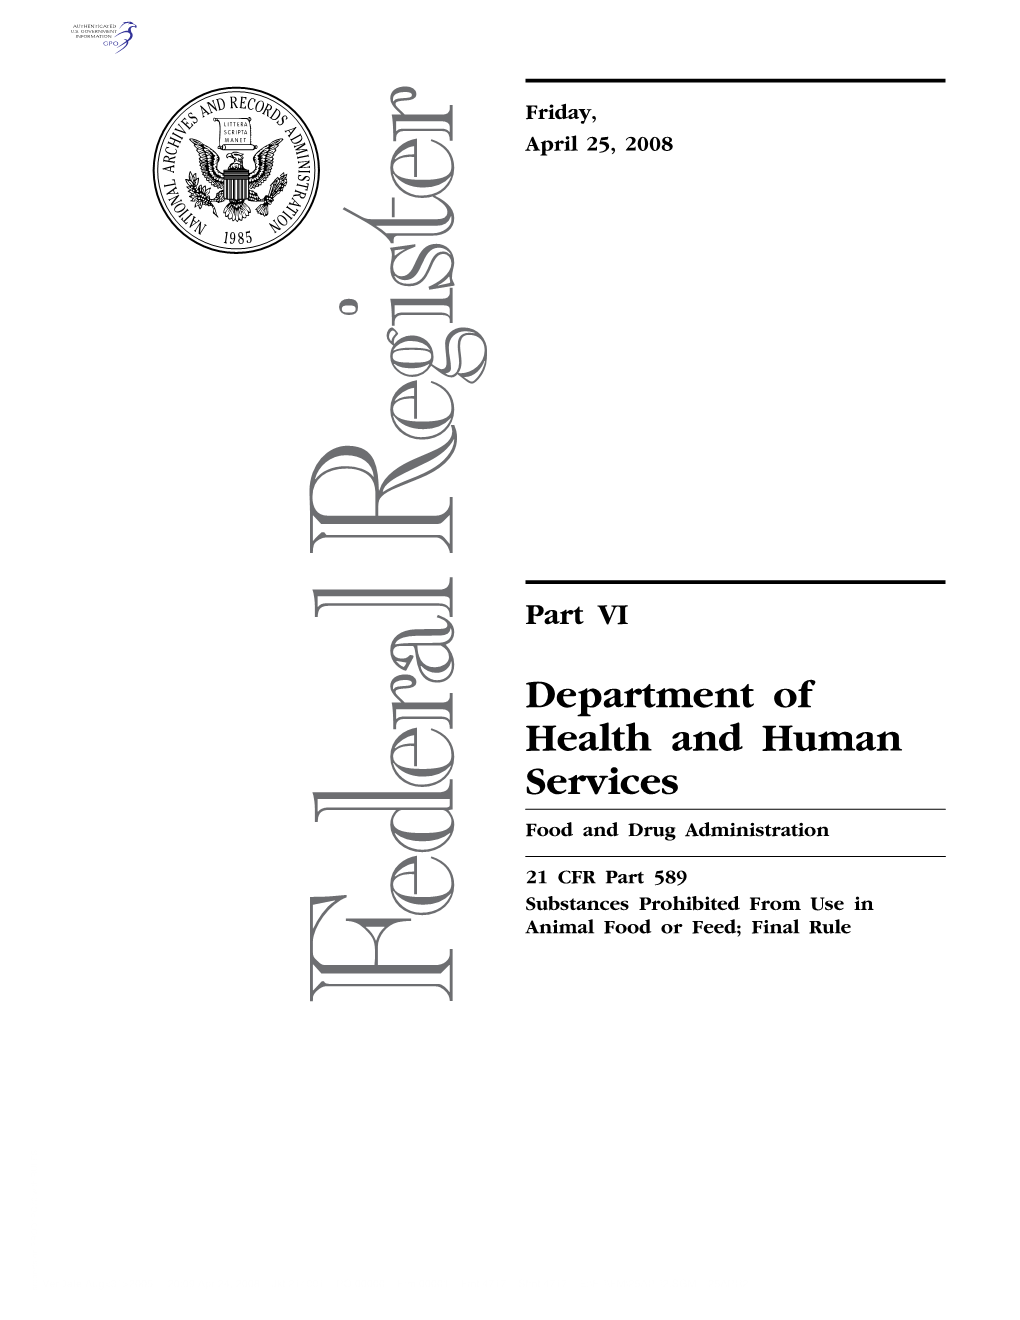 Department of Health and Human Services Food and Drug Administration